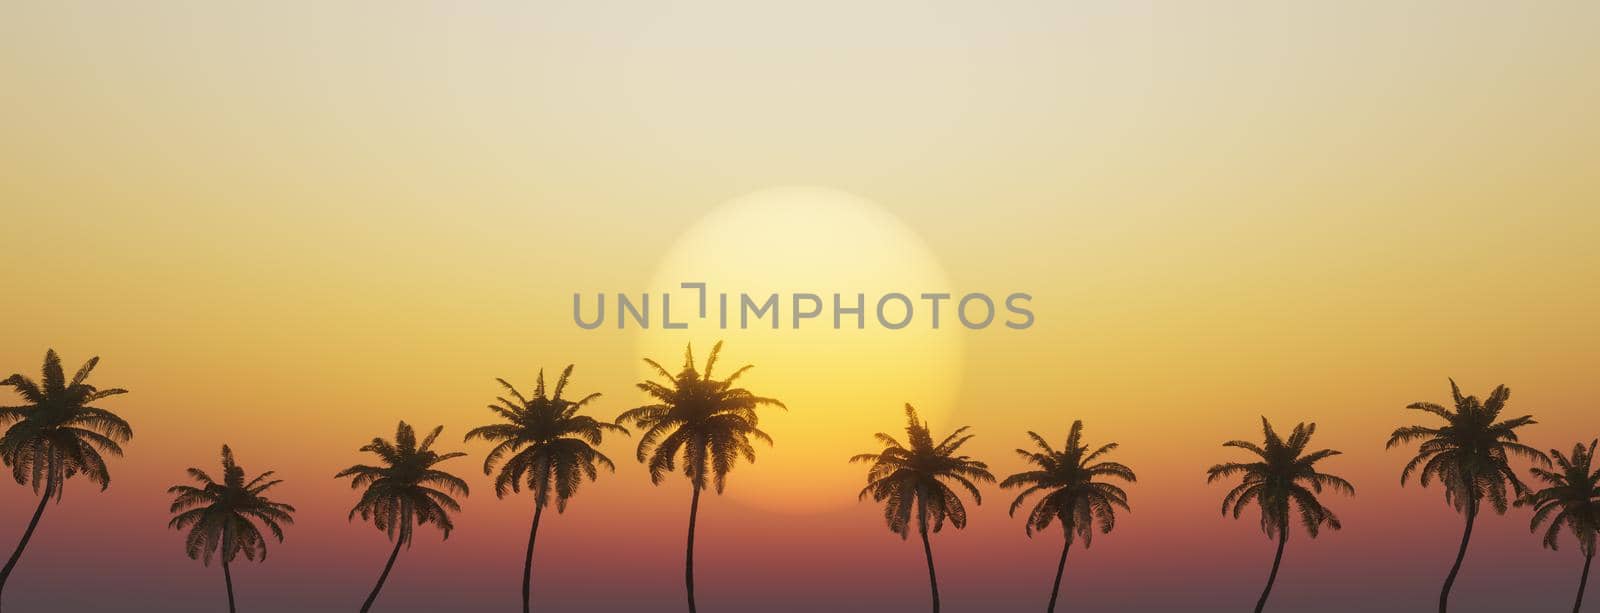 tropical sunset with palm trees by asolano